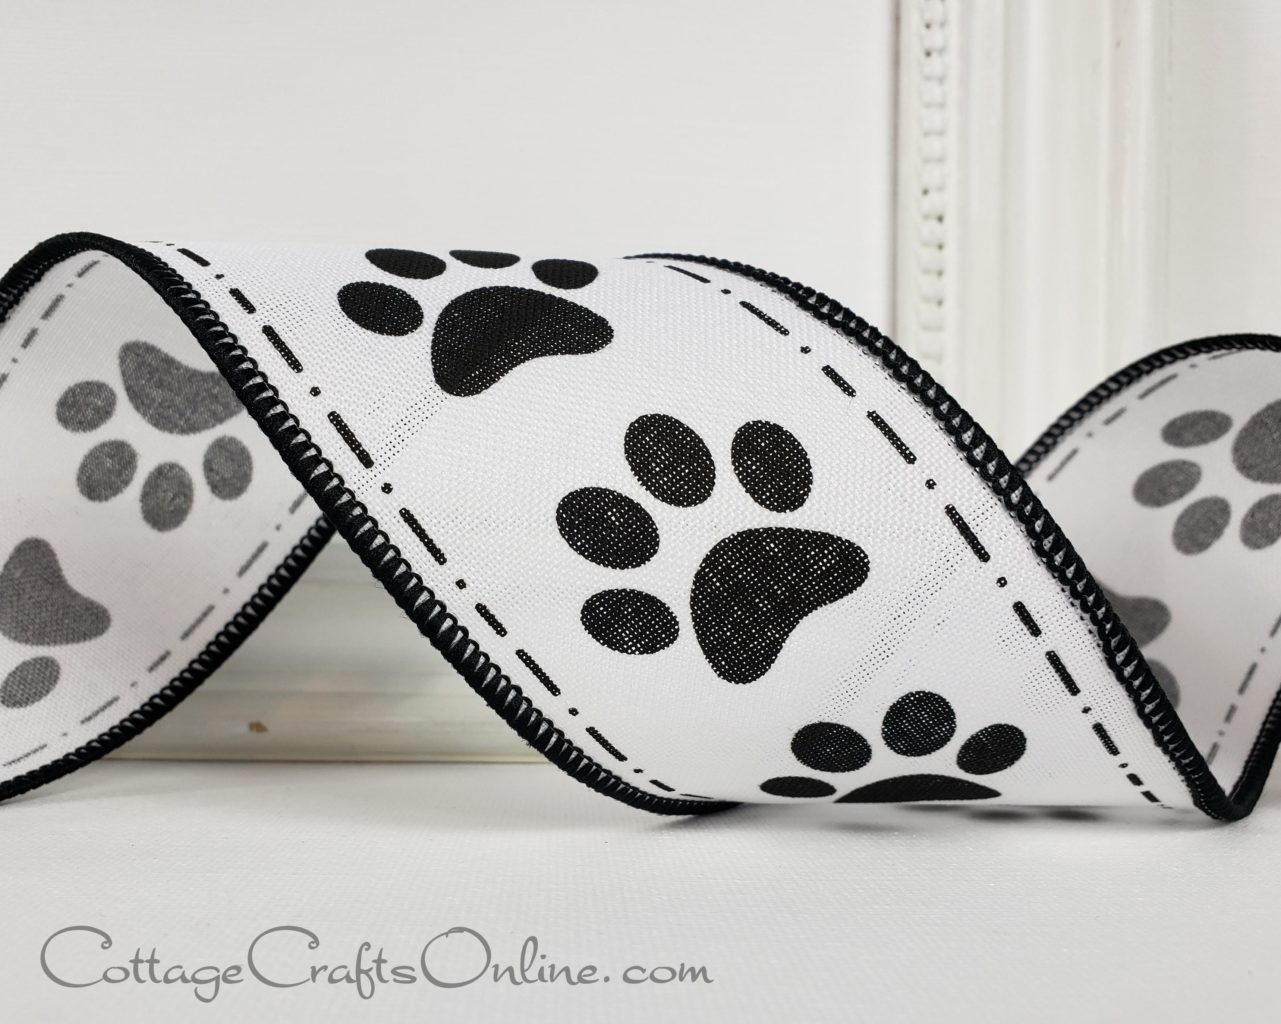 A black and white ribbon with pawprint patterns